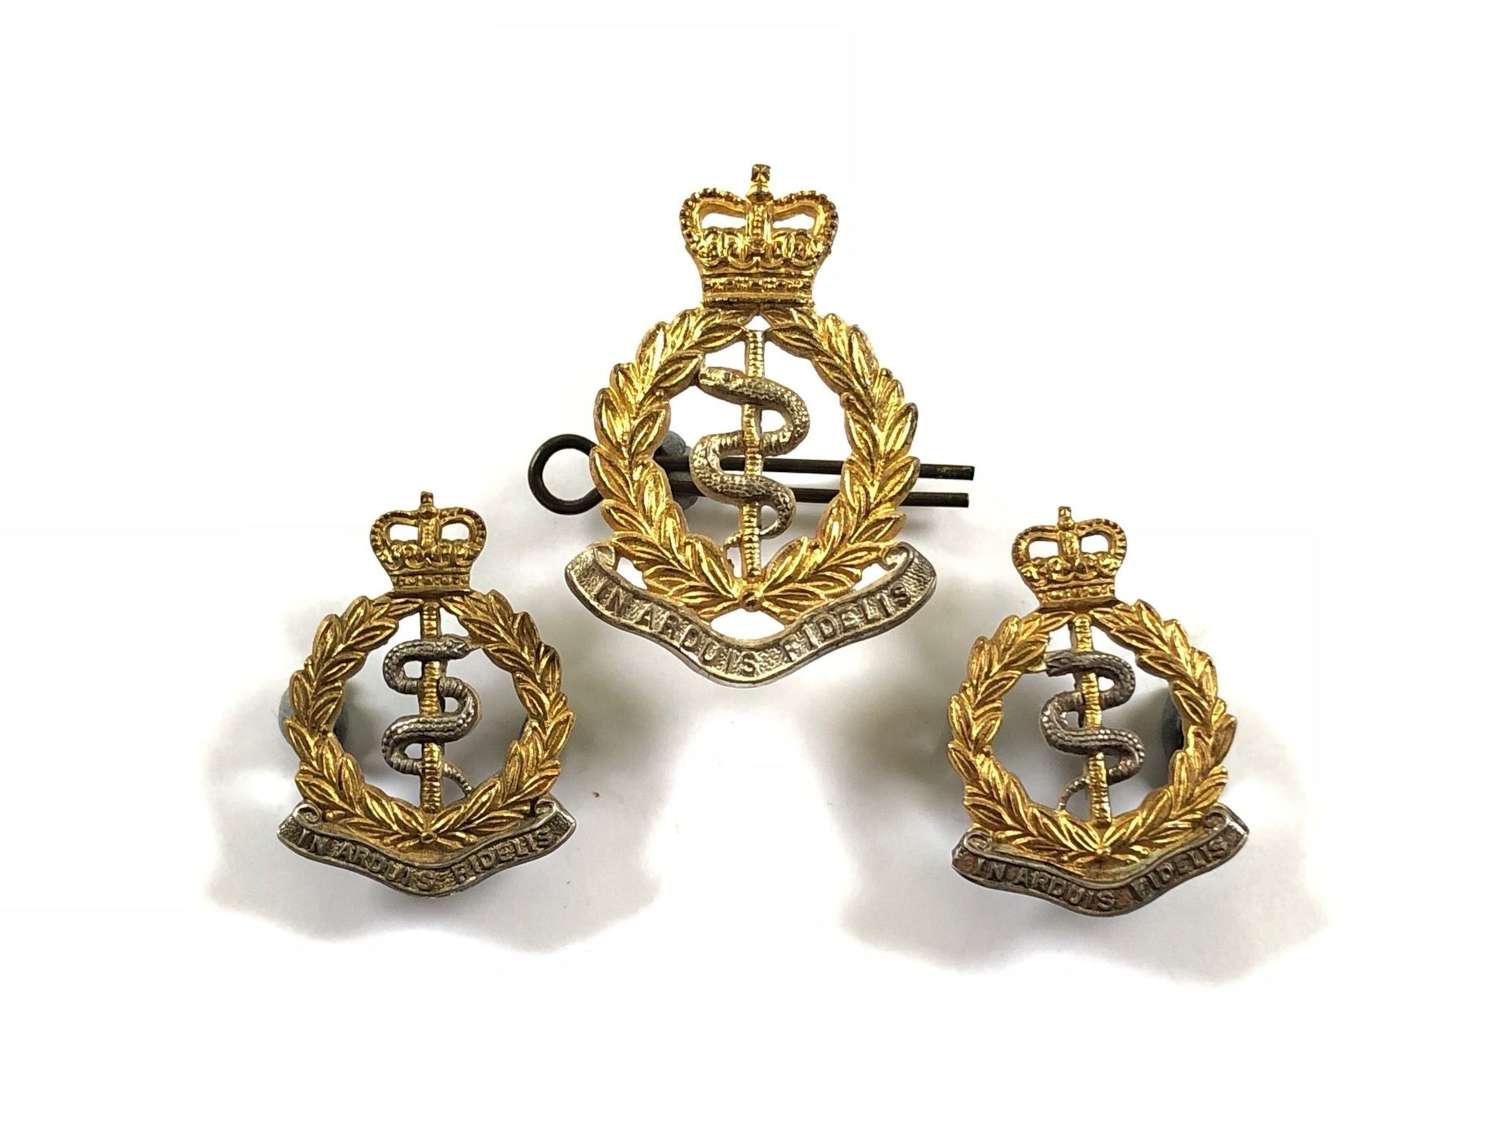 RAMC Officer’s Silvered & Gilt Cap and Collar Badges.